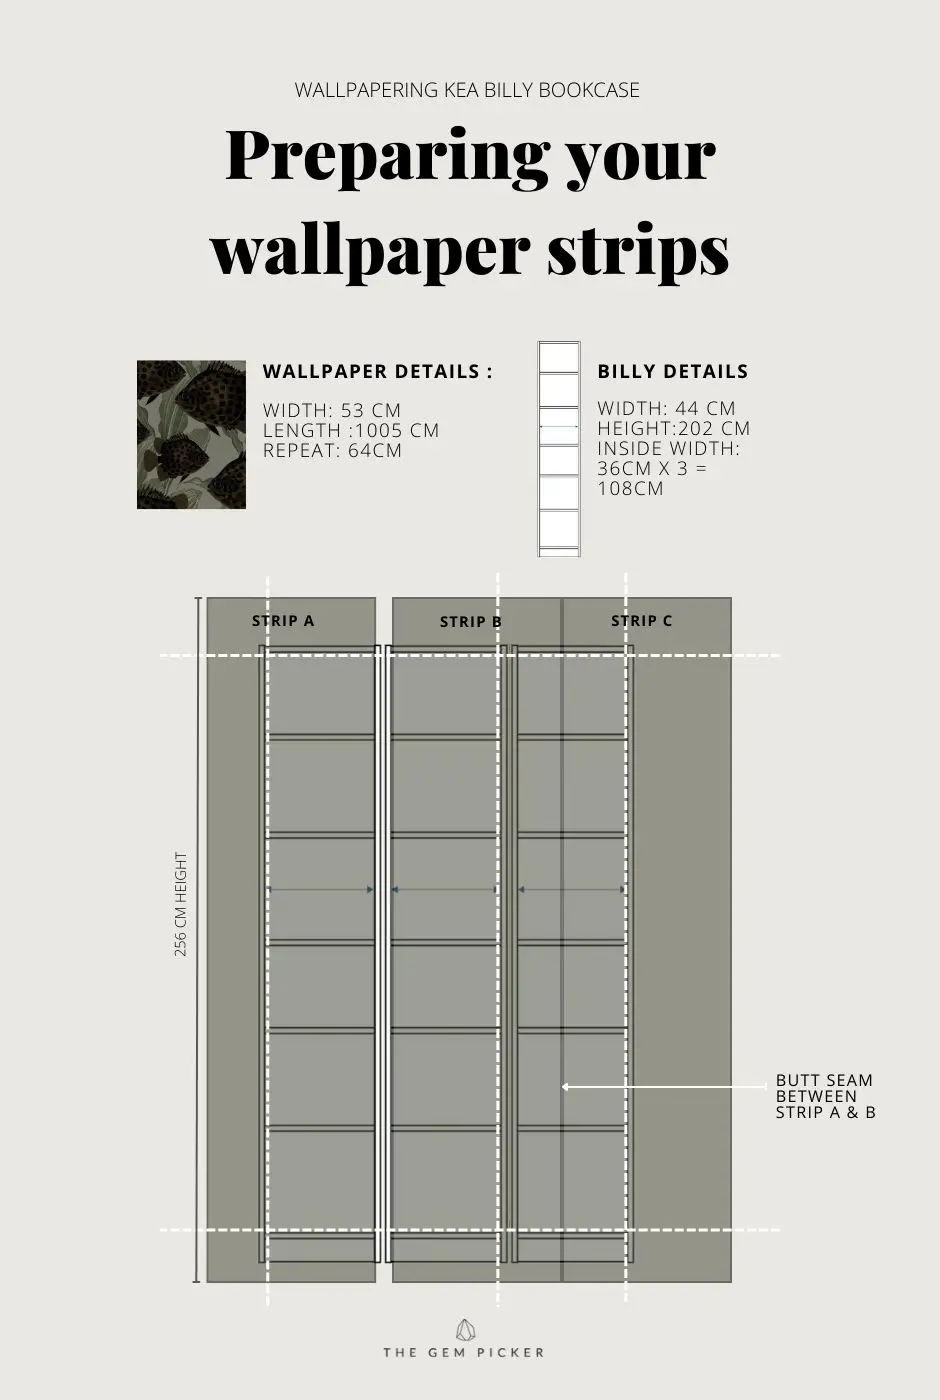 How to place the 3 wallpaper strips on the IKEA Billy bookcase